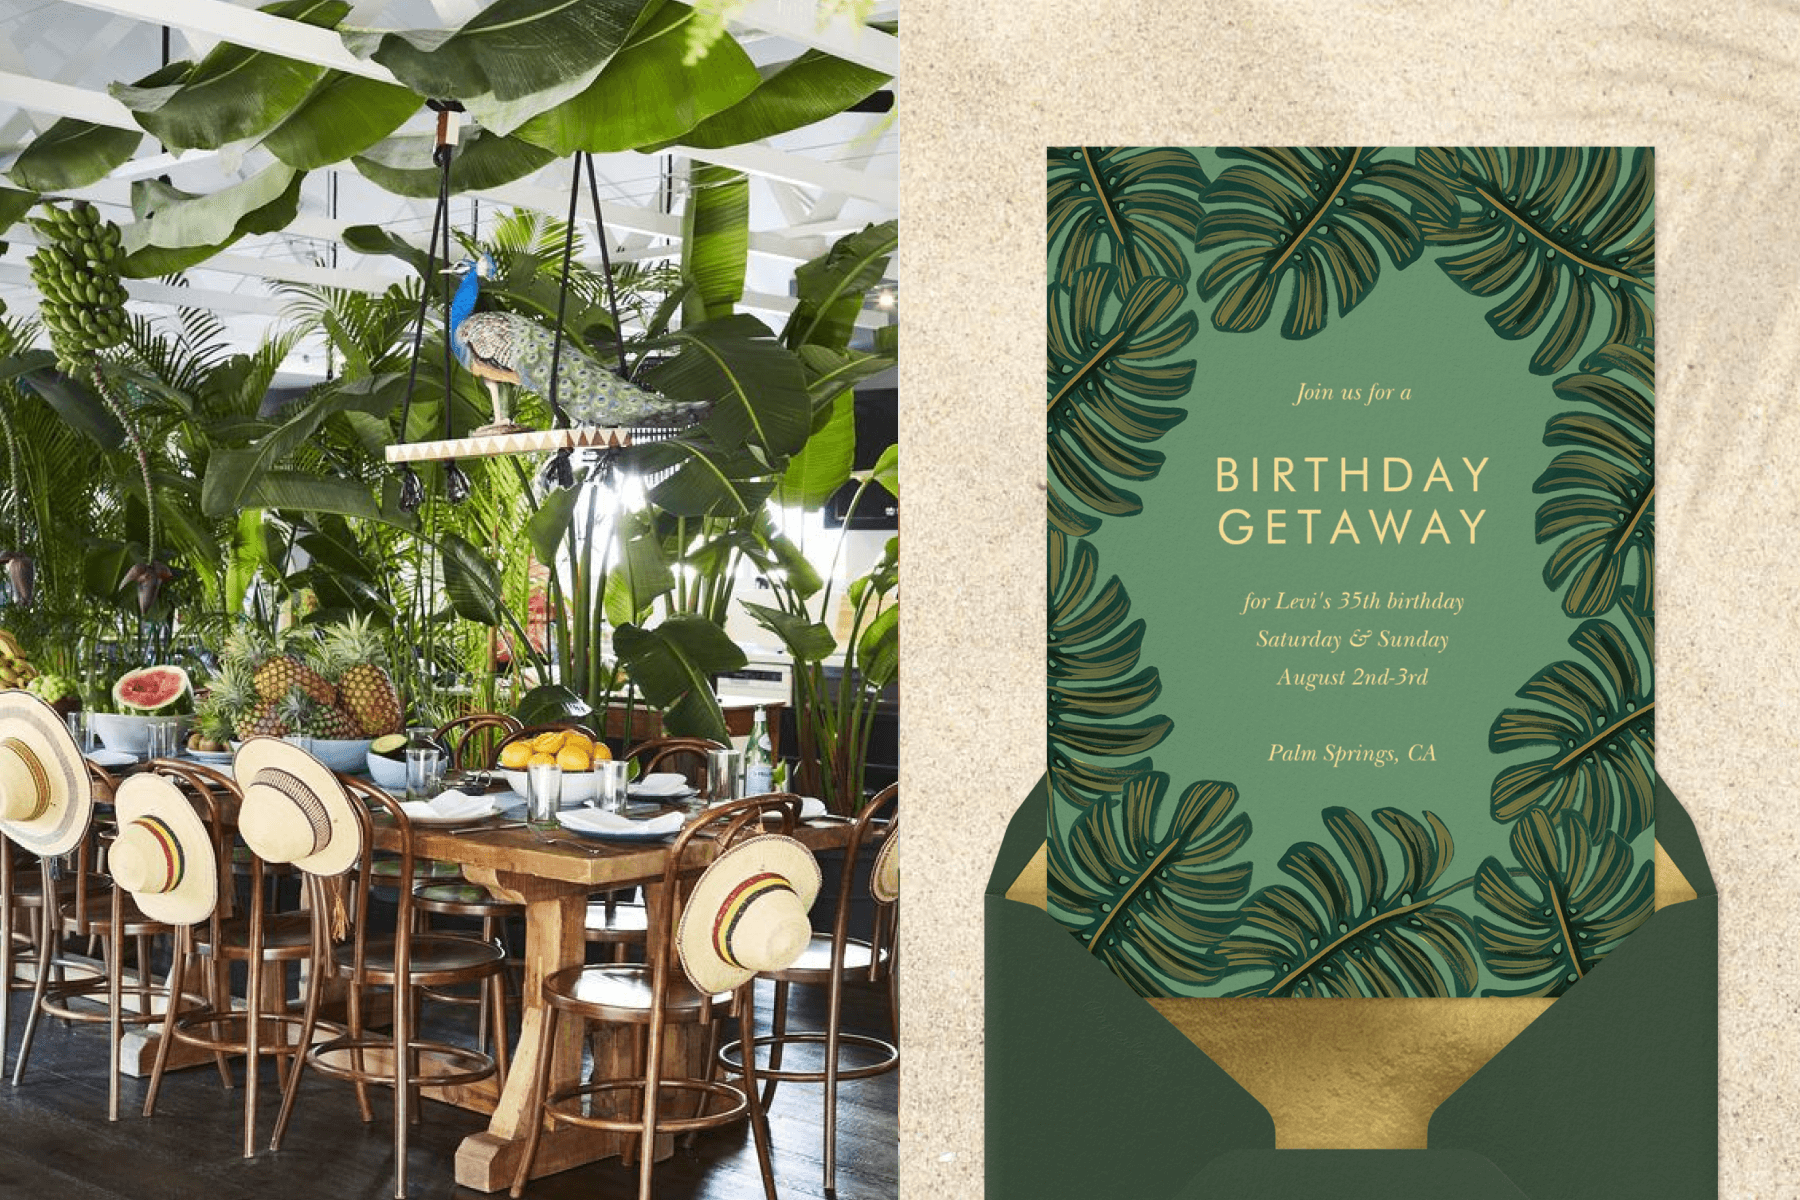 Left: A wooden banquet table with wide brimmed straw hats on the backs of the chairs topped by tropical fruit and surrounded by lush greenery, like banana leaves, and a peacock hanging from the rafters. Right: A green birthday invitation has a border of monstera leaves.